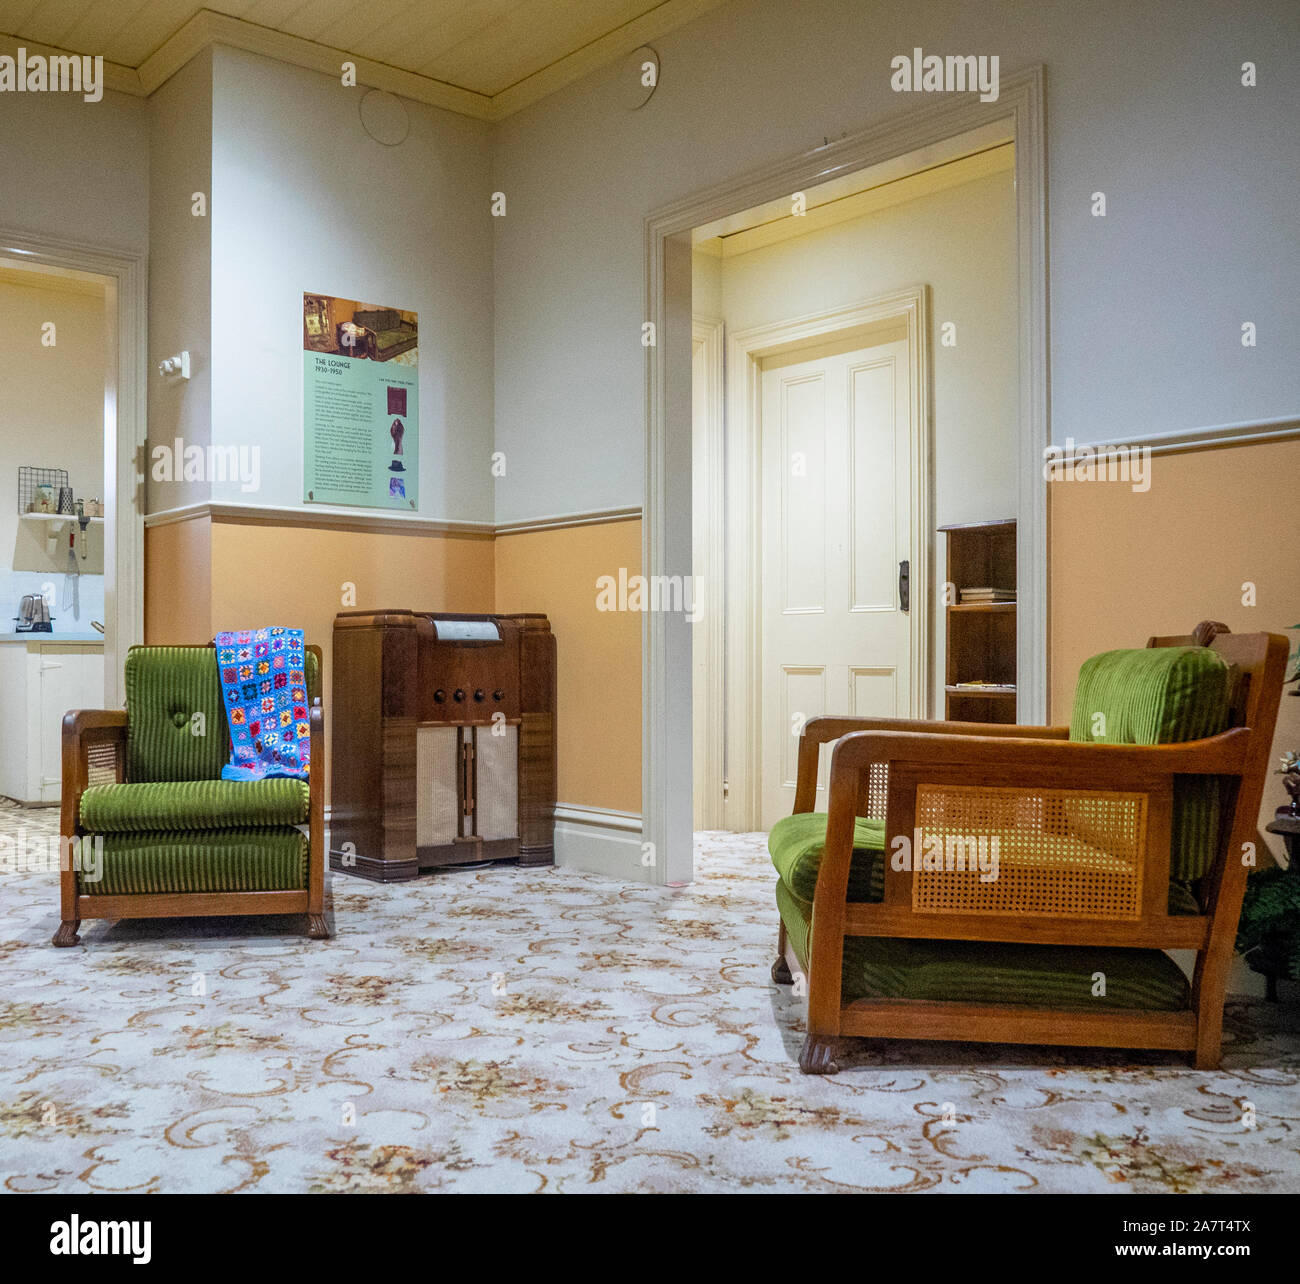 Display Of A Typical Australian Home Lounge Room And Furniture From 1930 To 1950 At National Wool Museum Geelong Victoria Australia Stock Photo Alamy,3 Bedroom Layout Design